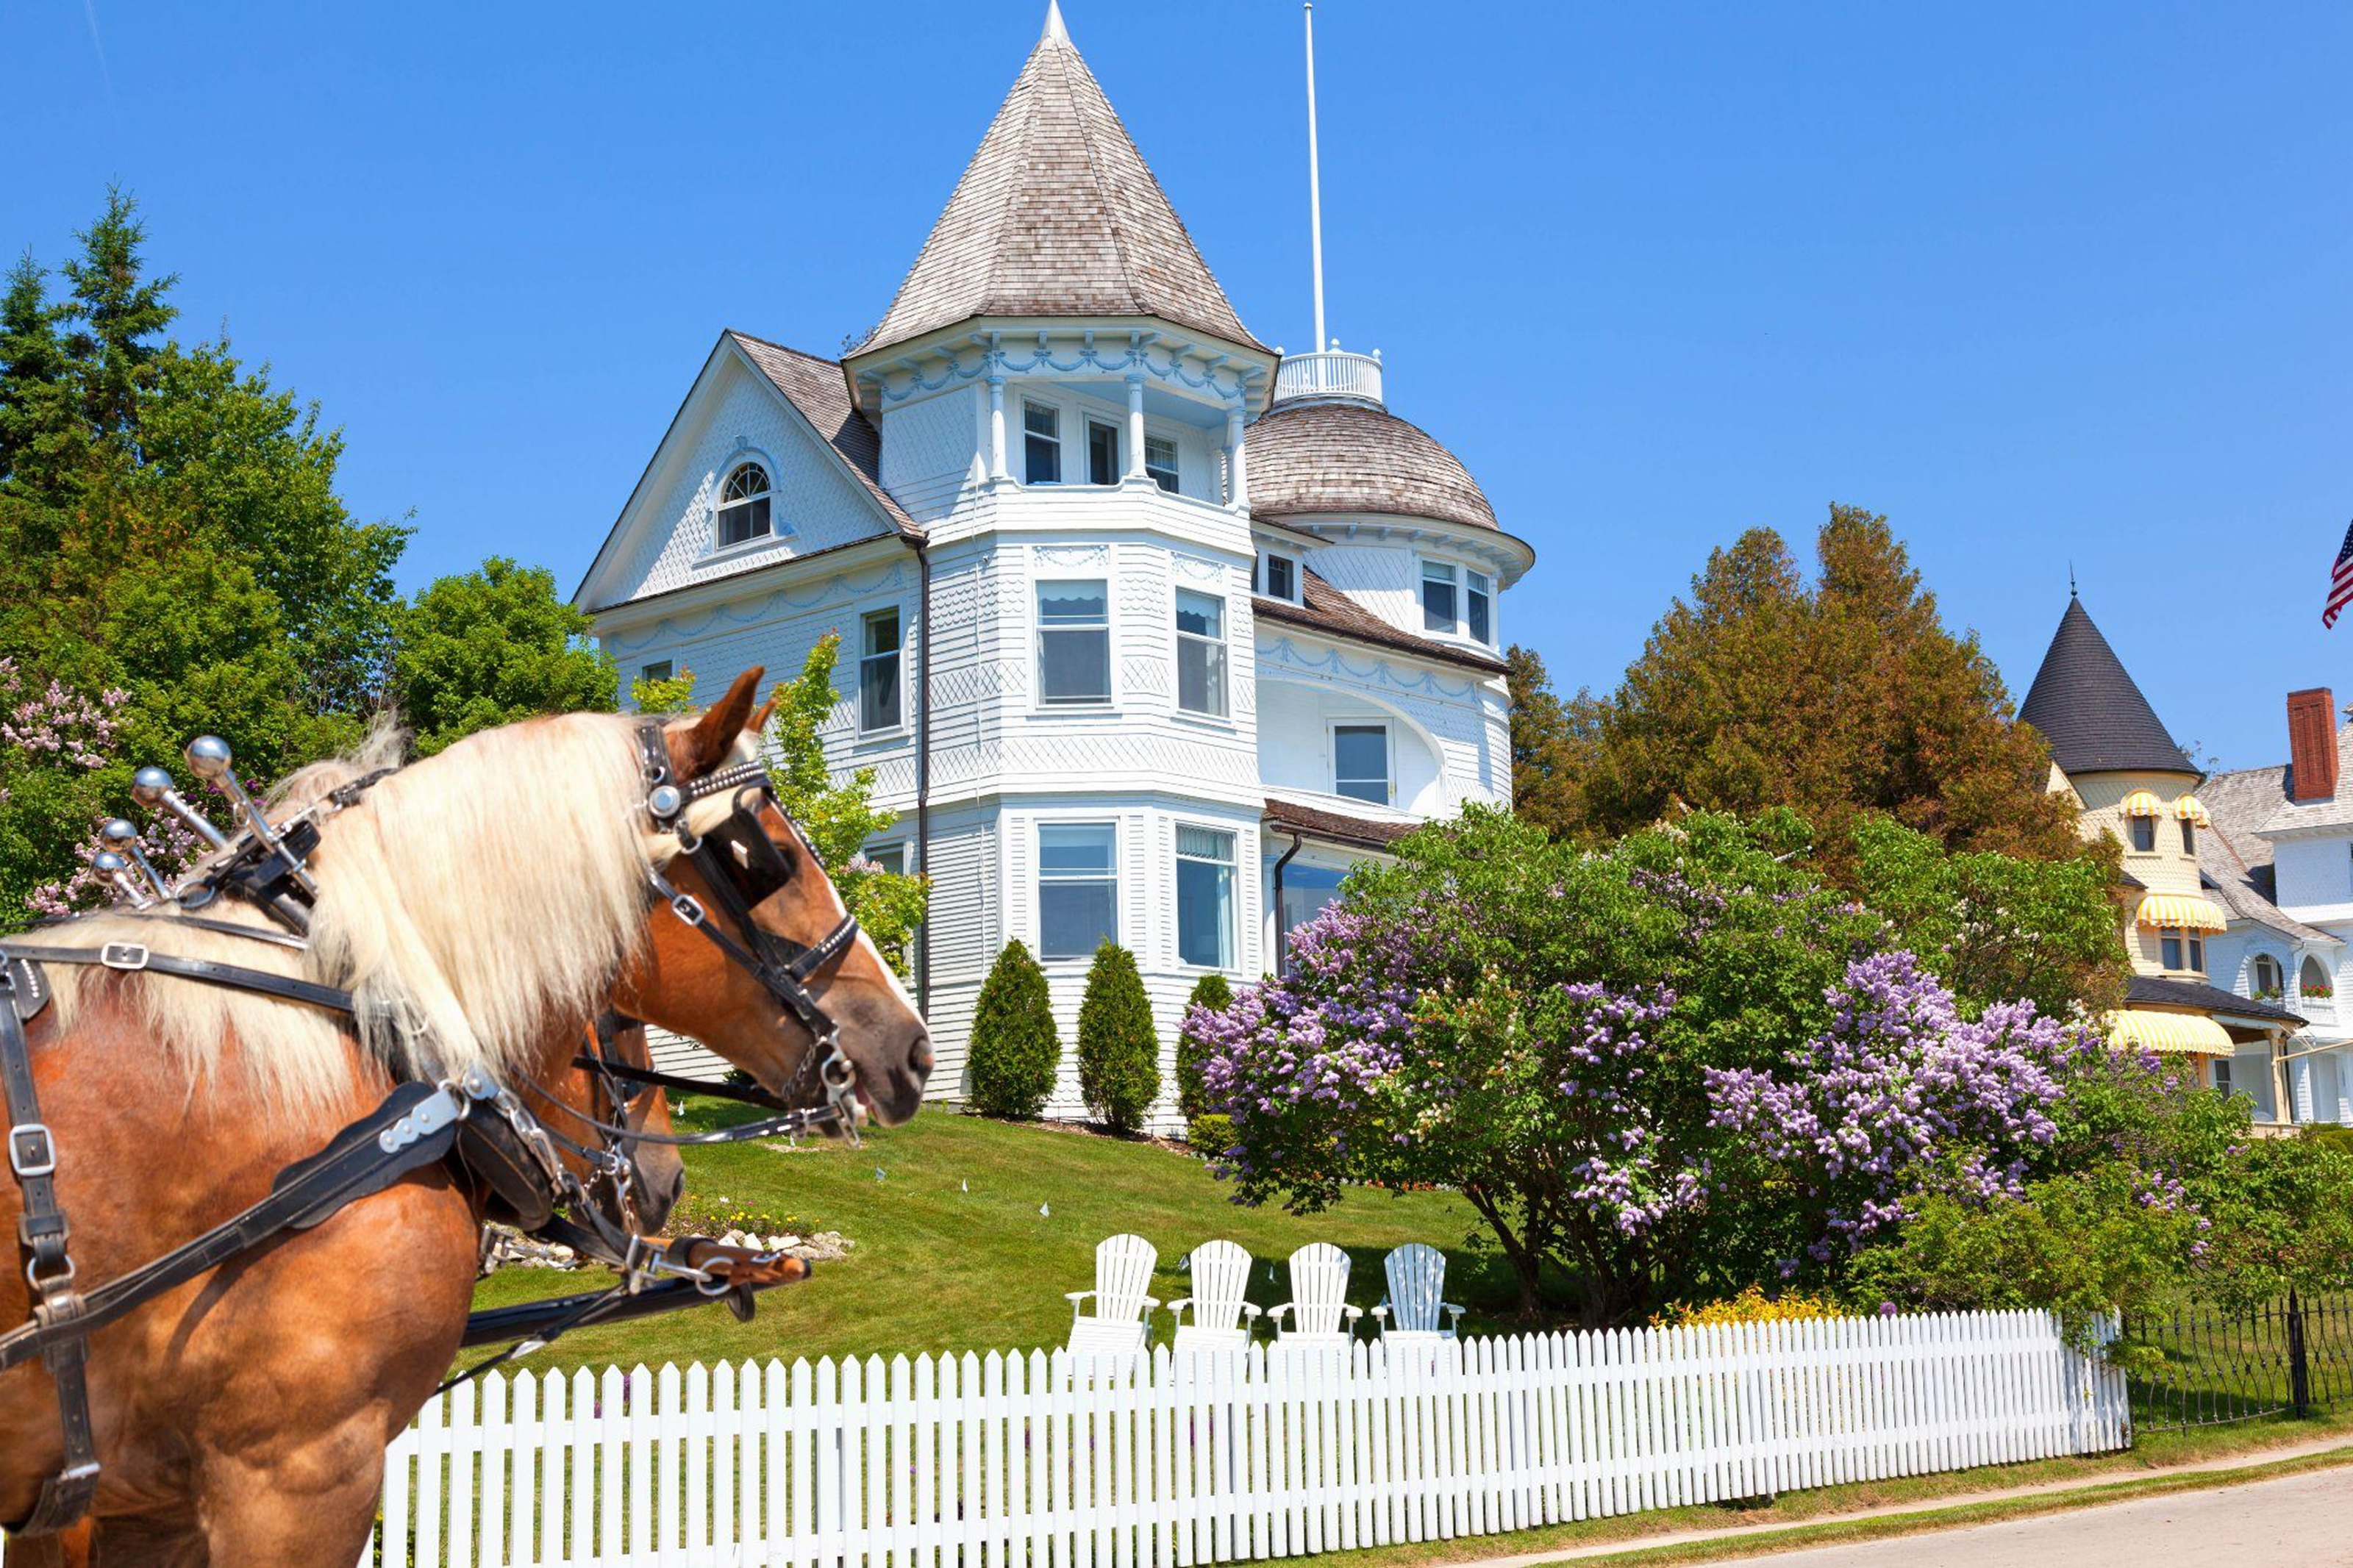 Two Carriage Horses in front of a Victorian House